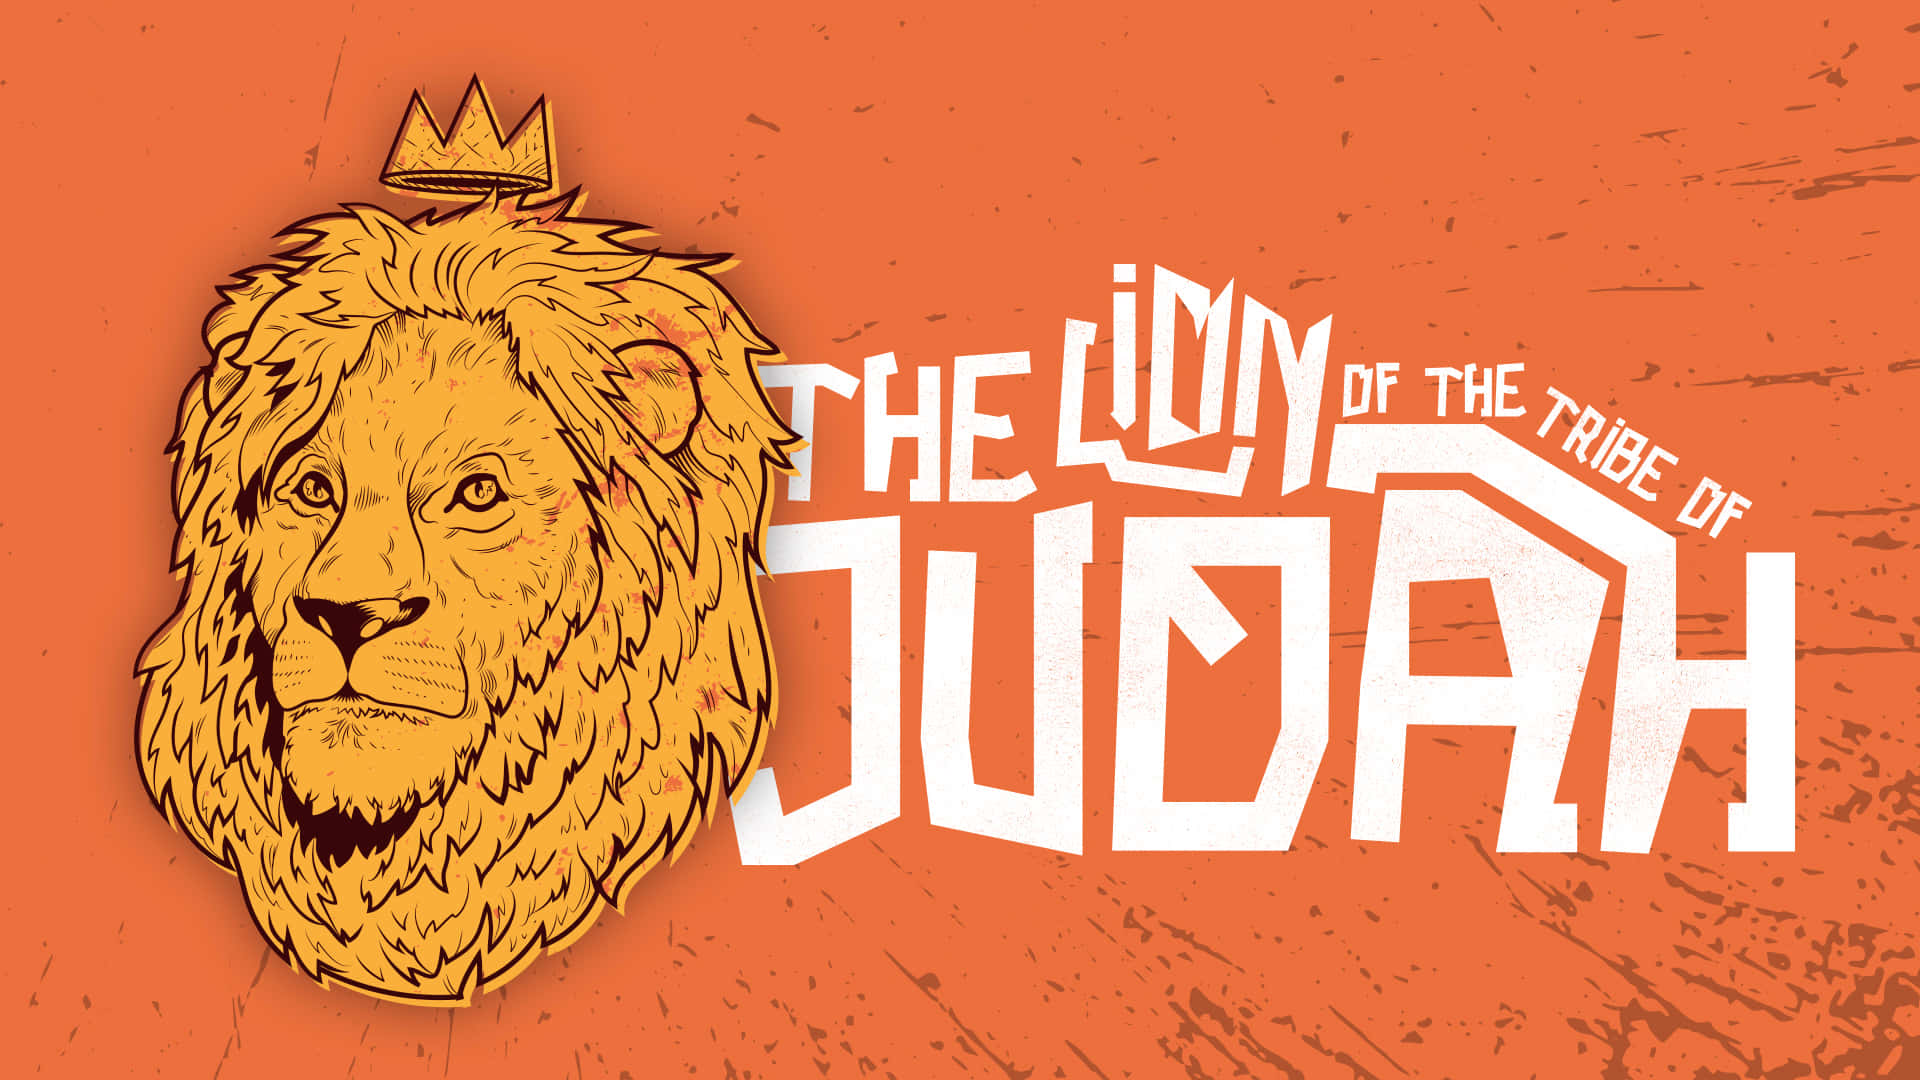 The Lion of Judah symbolizing power and strength